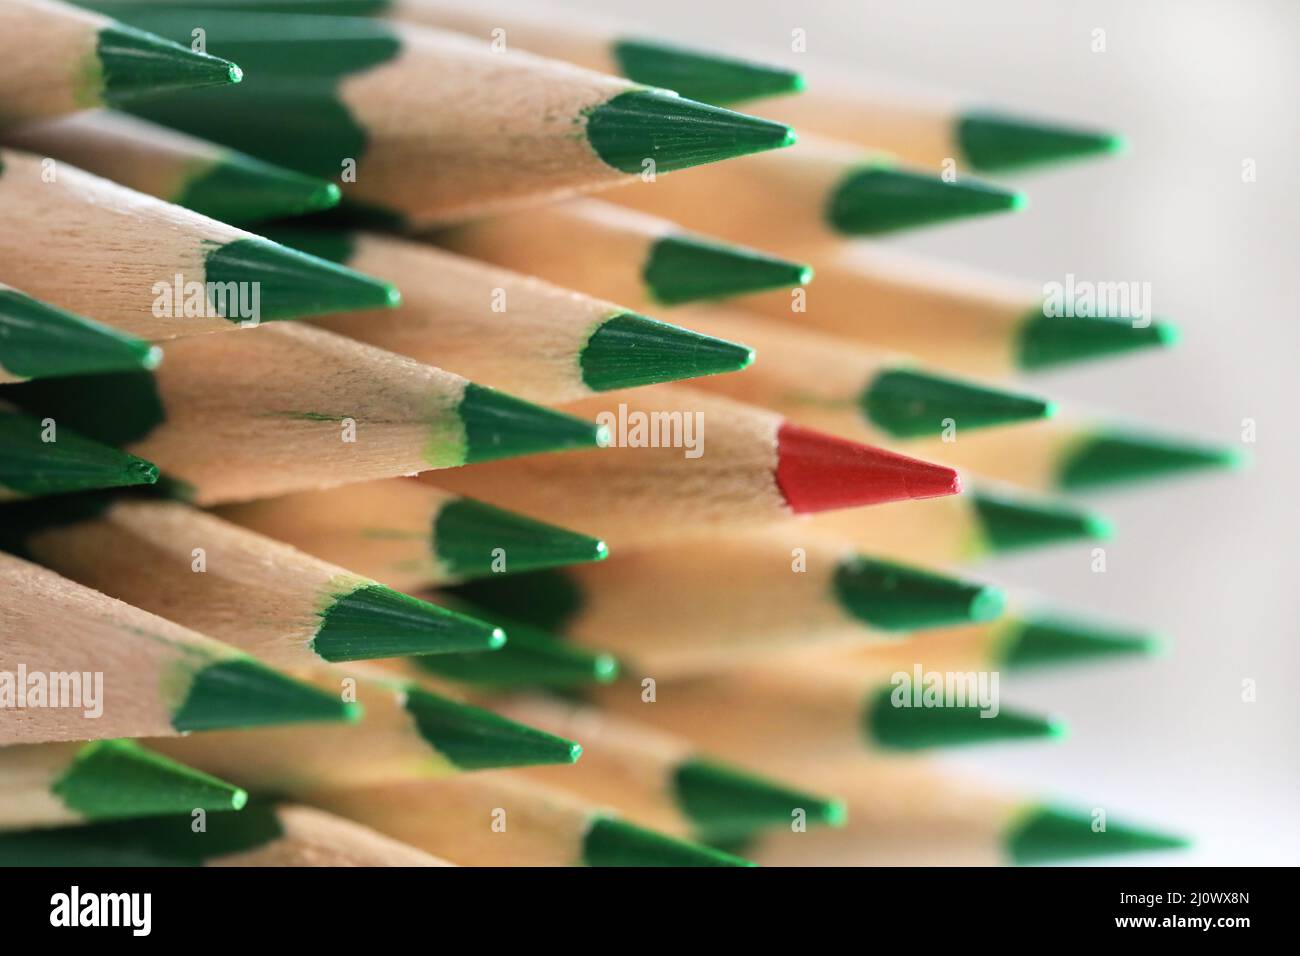 A lone sharp red colored pencil sticking out from the crowd of green pencils. Individuality and confidence concept. Celebrating differences idea. Stock Photo